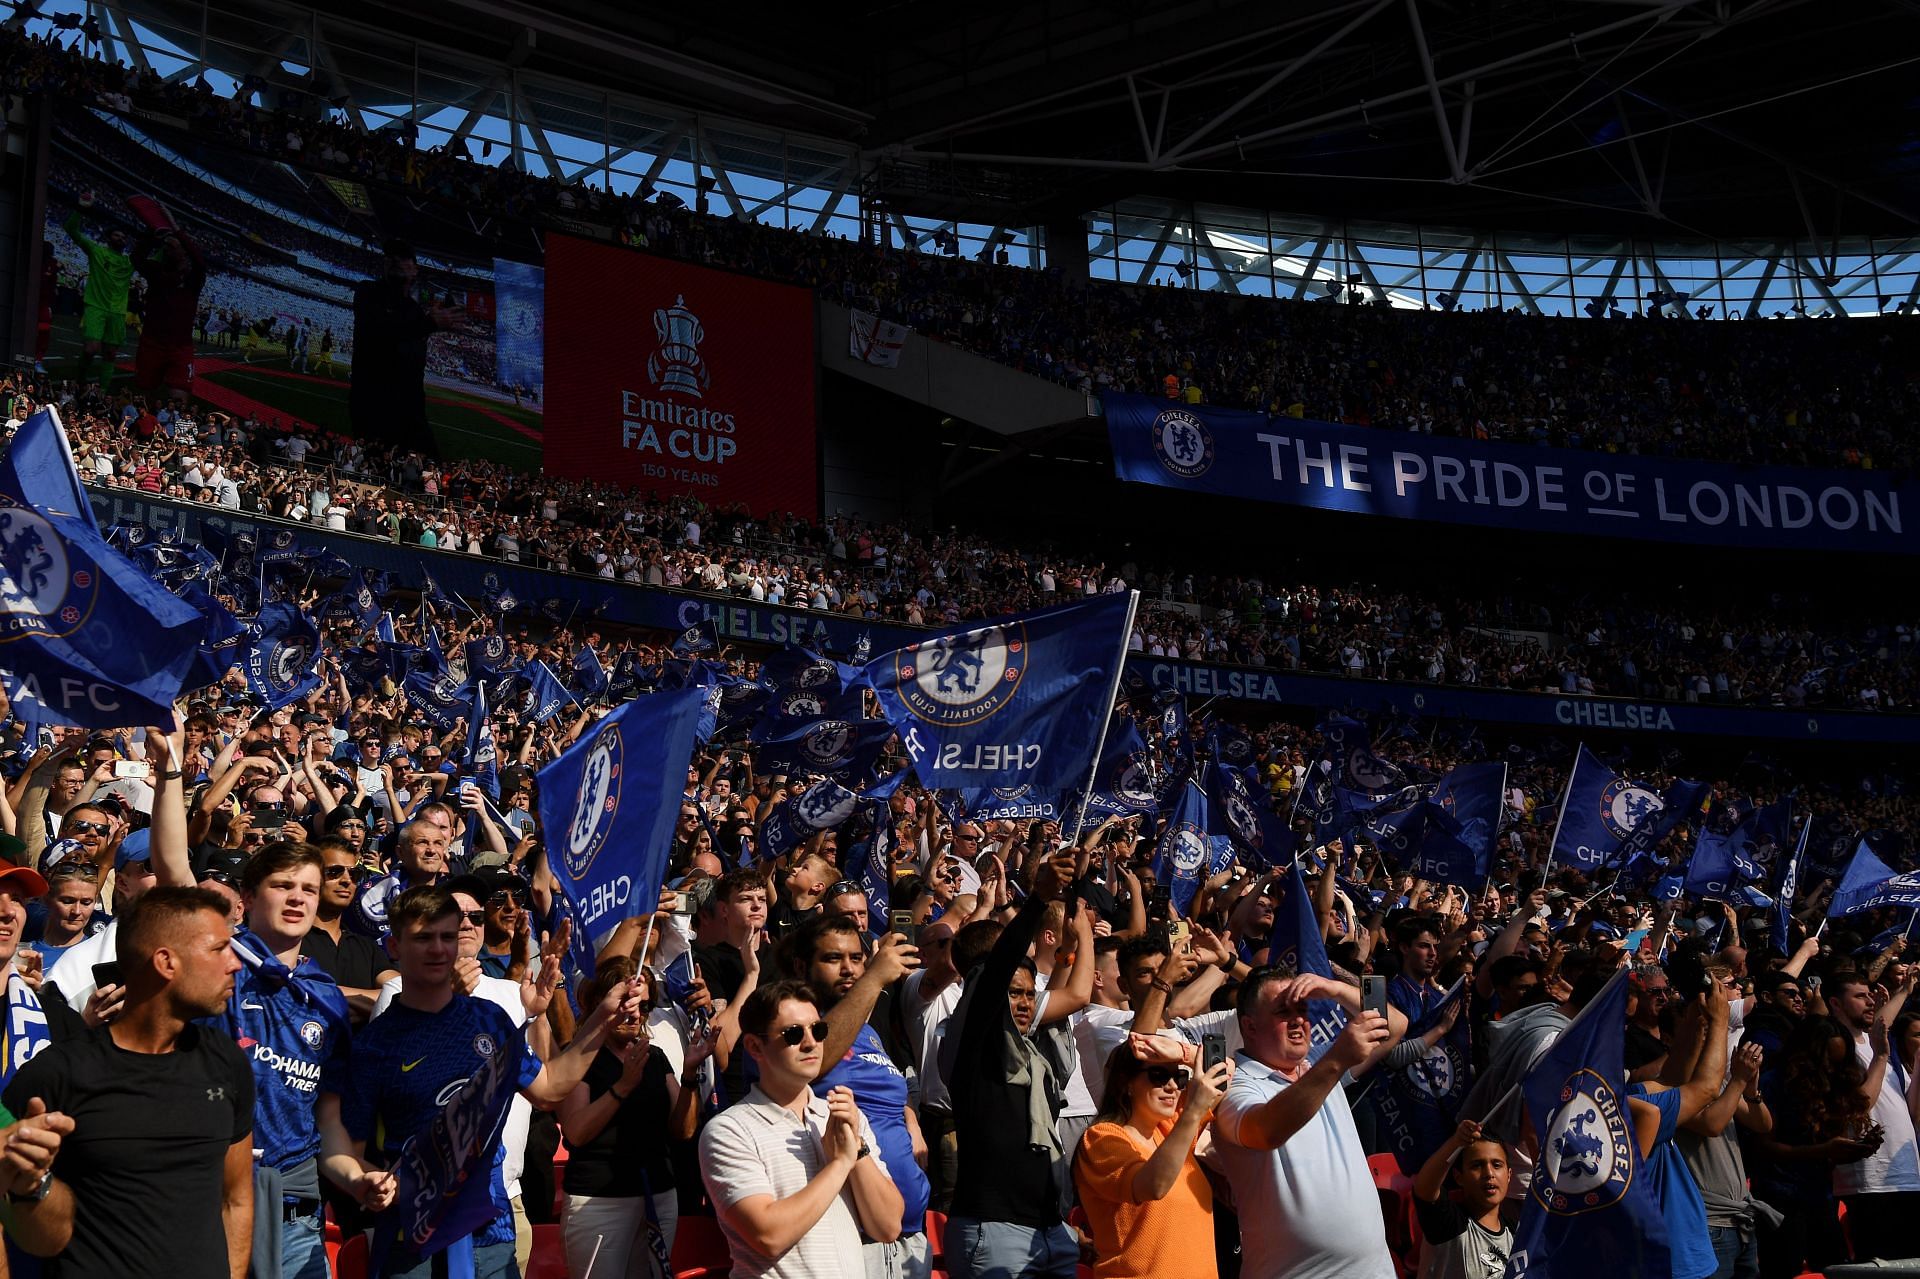 Chelsea v Liverpool: The Emirates FA Cup Final